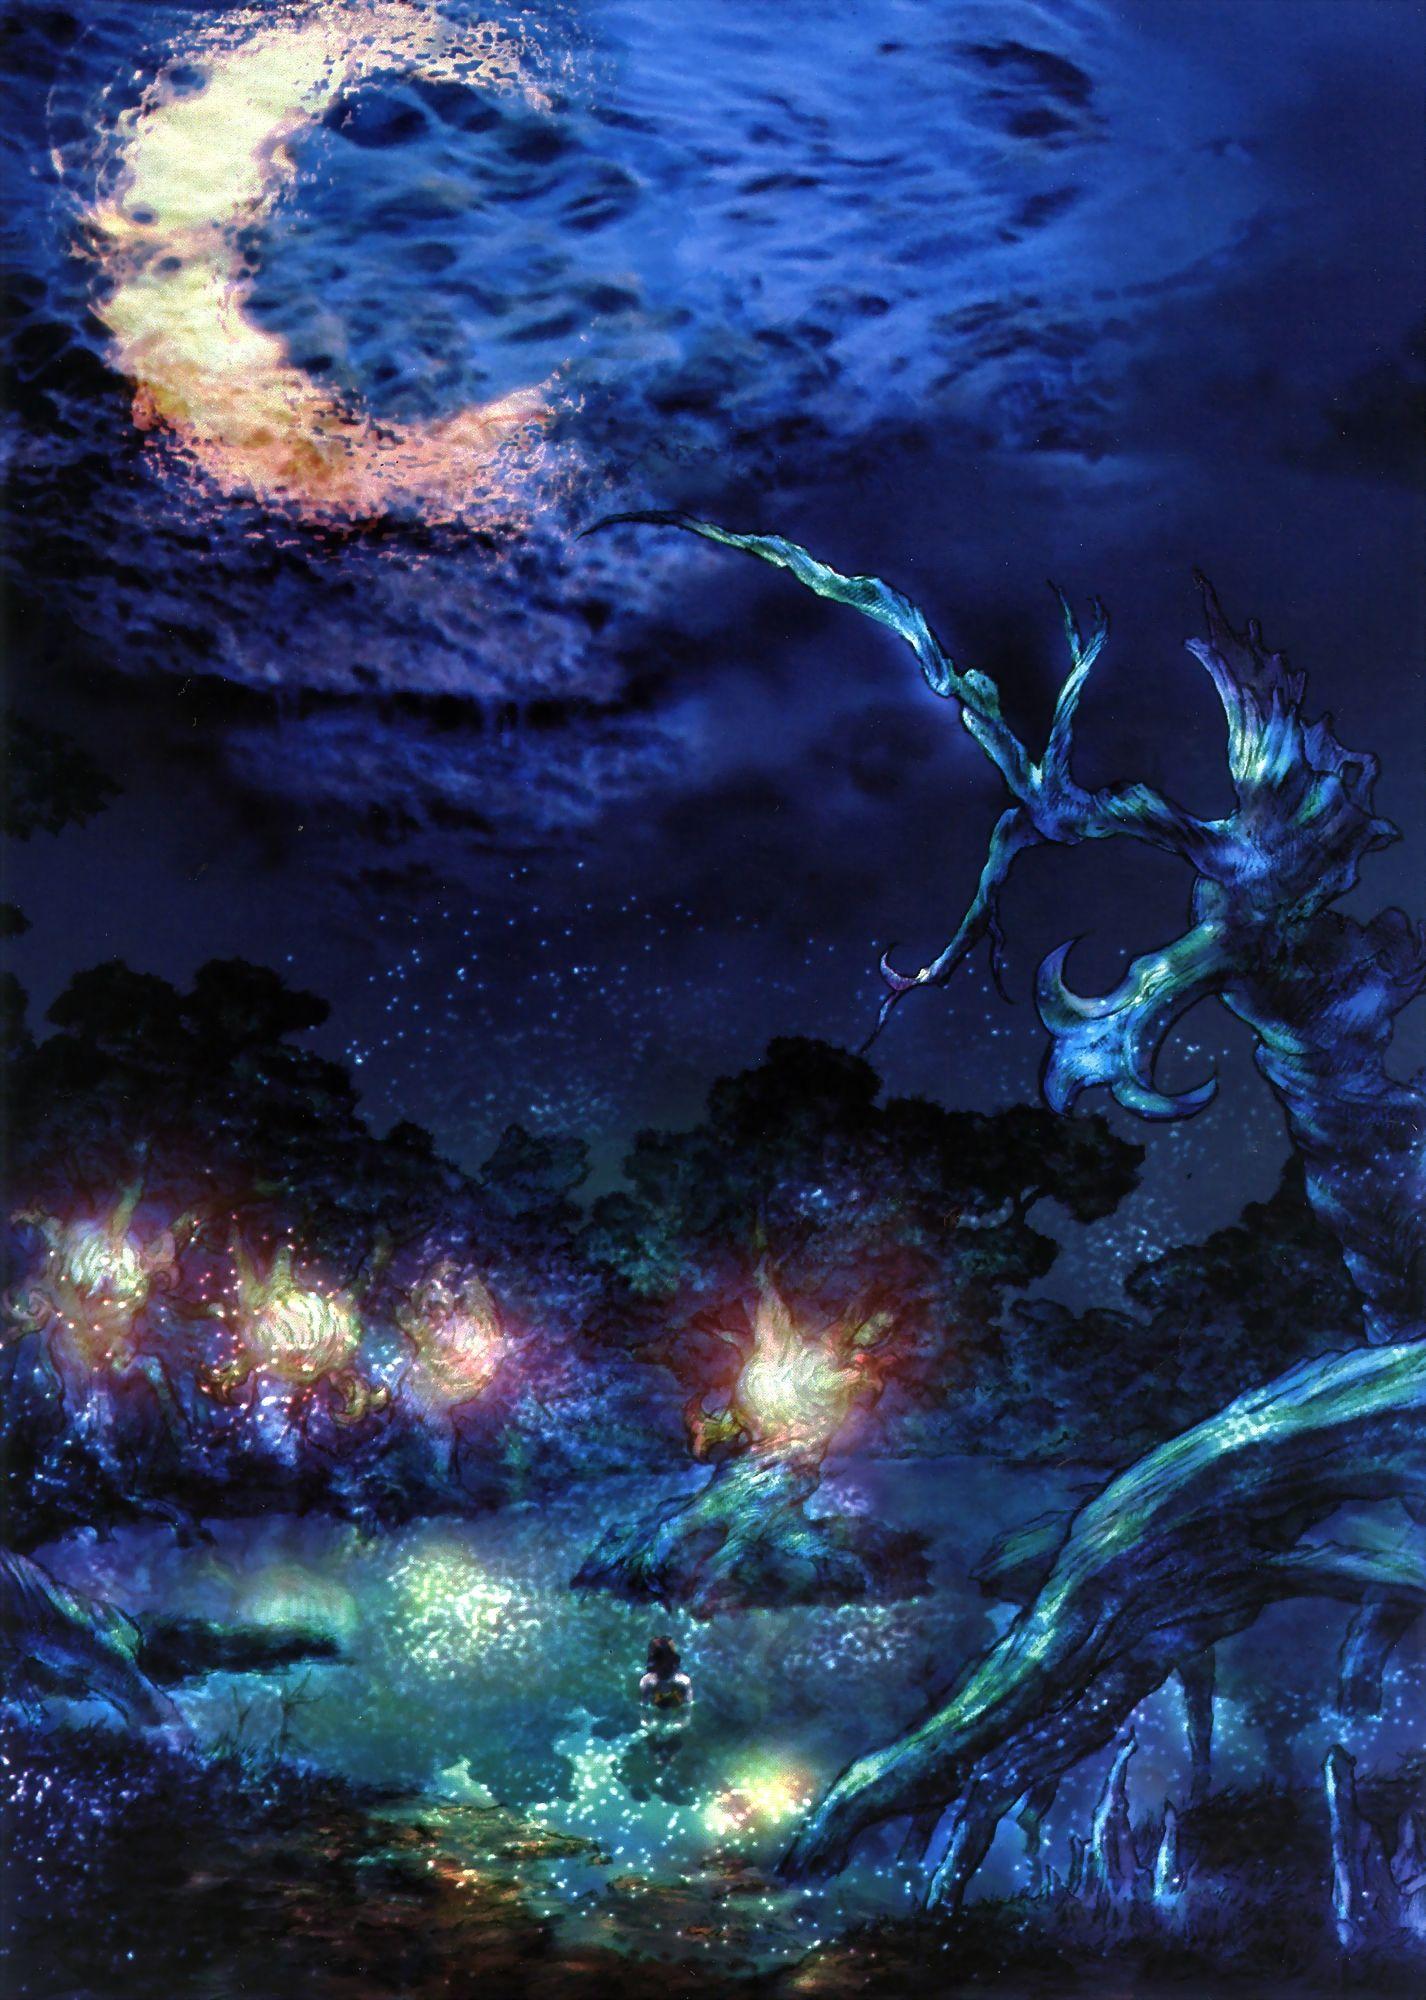 Ffx Wallpapers Top Free Ffx Backgrounds Wallpaperaccess